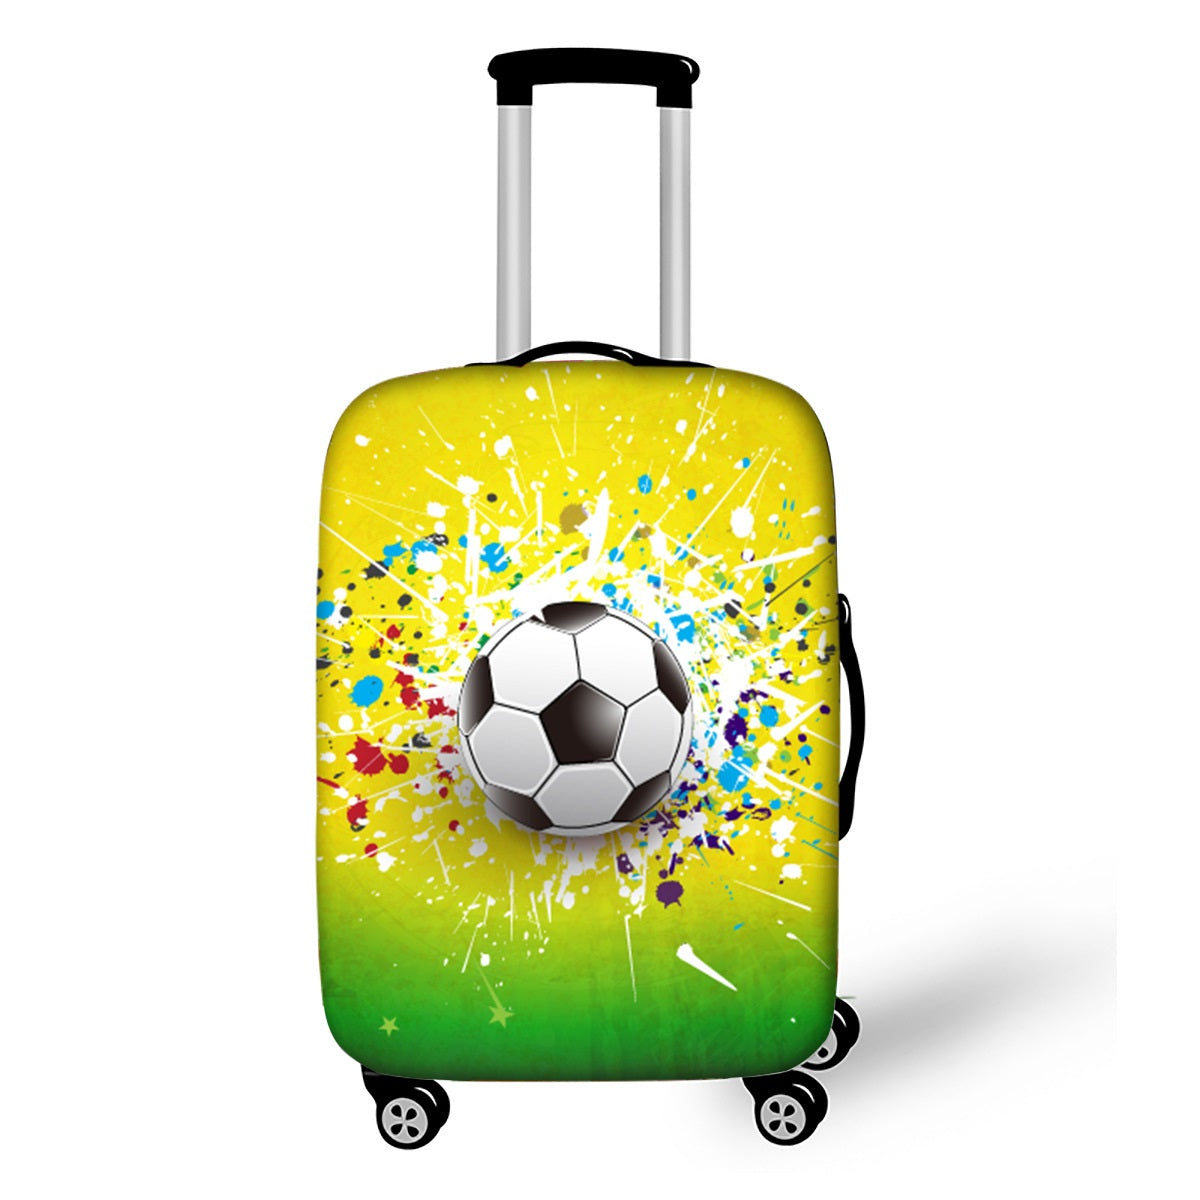 Fashion Luggage Soccer Graphic Cover Suitcase Protector Waterproof Anti-Dust Stretchable